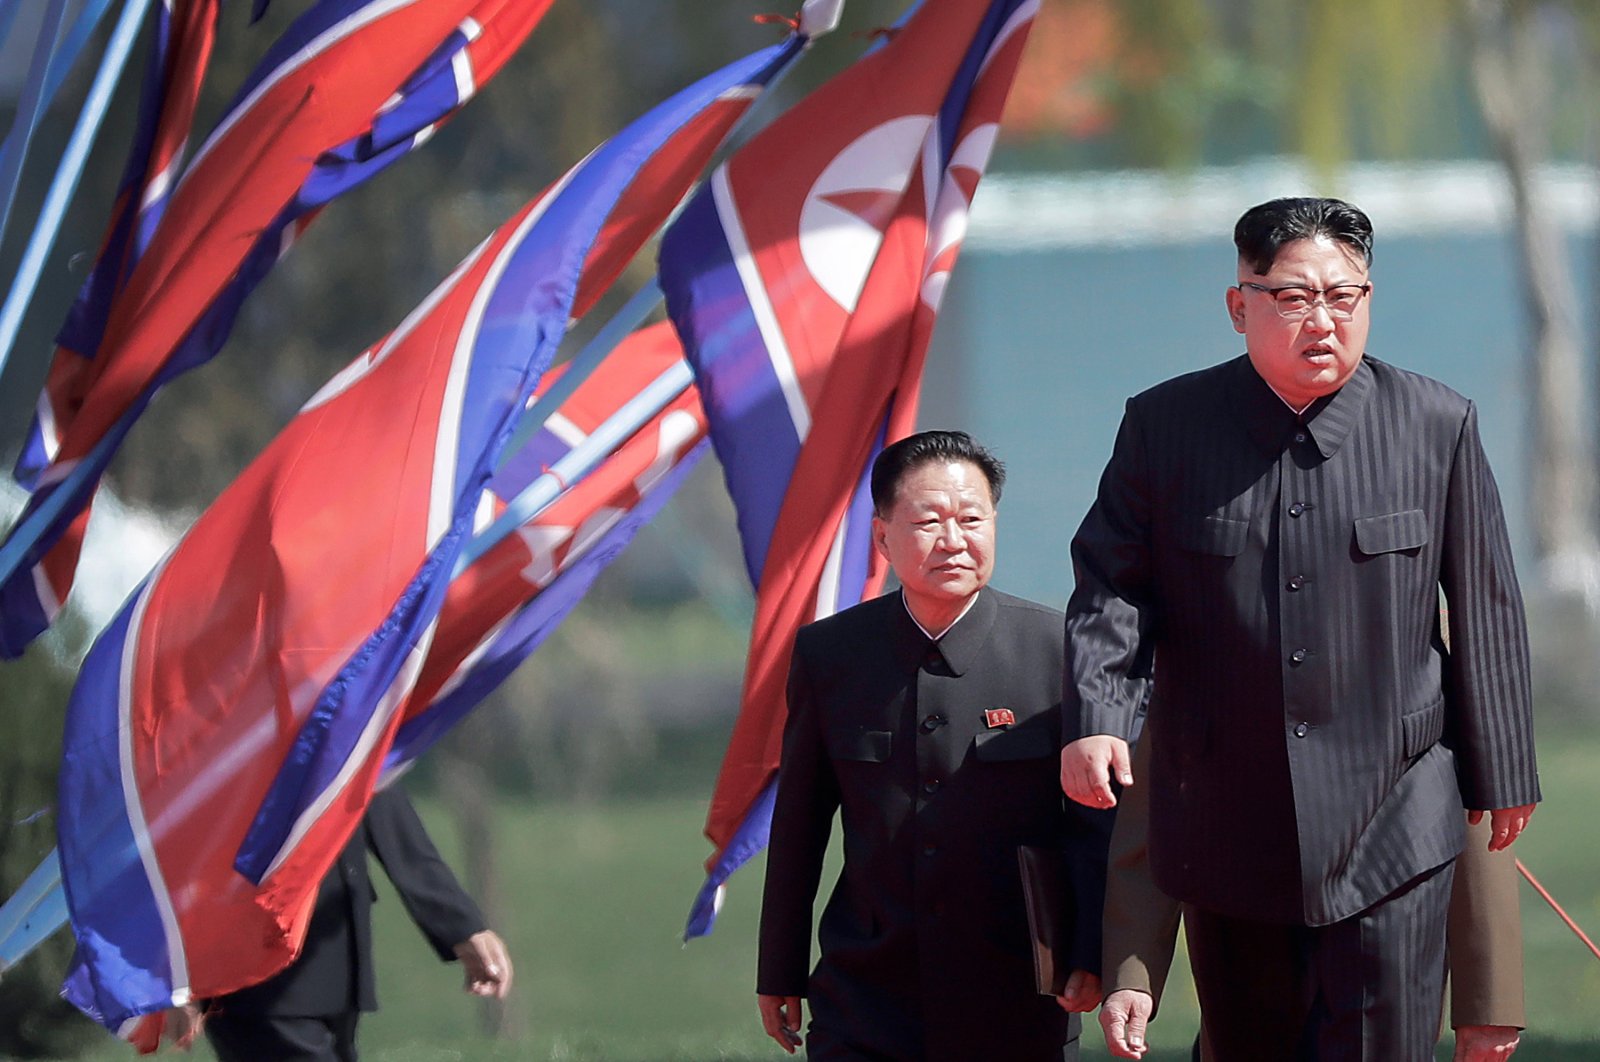 In this April 13, 2017 file photo, North Korean leader Kim Jong Un, right, and Choe Ryong Hae, vice-chairman of the central committee of the Workers' Party, arrive for the official opening of the Ryomyong residential area, in Pyongyang, North Korea. (AP Photo)